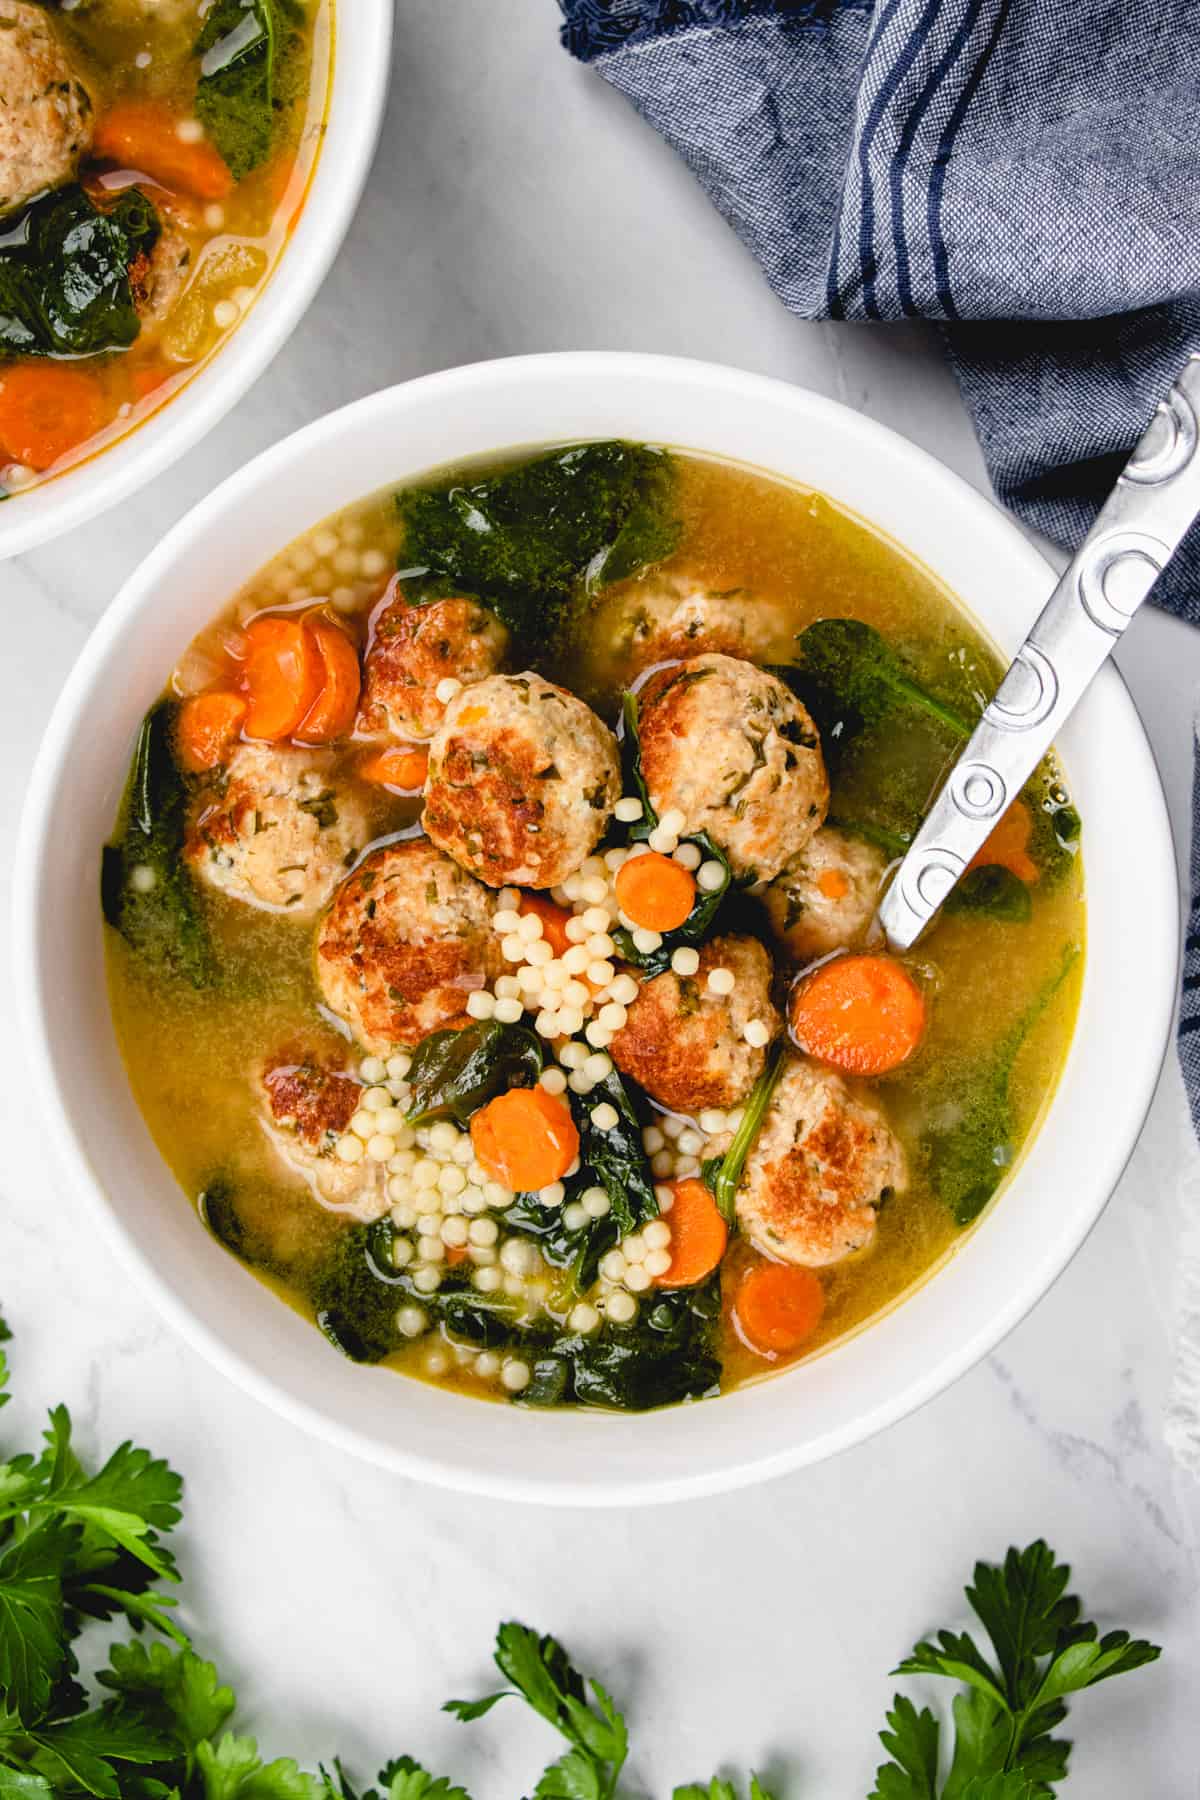 Italian Wedding Soup turkey with meatballs, acini de pepe pasta, and spinach in a white bowl.